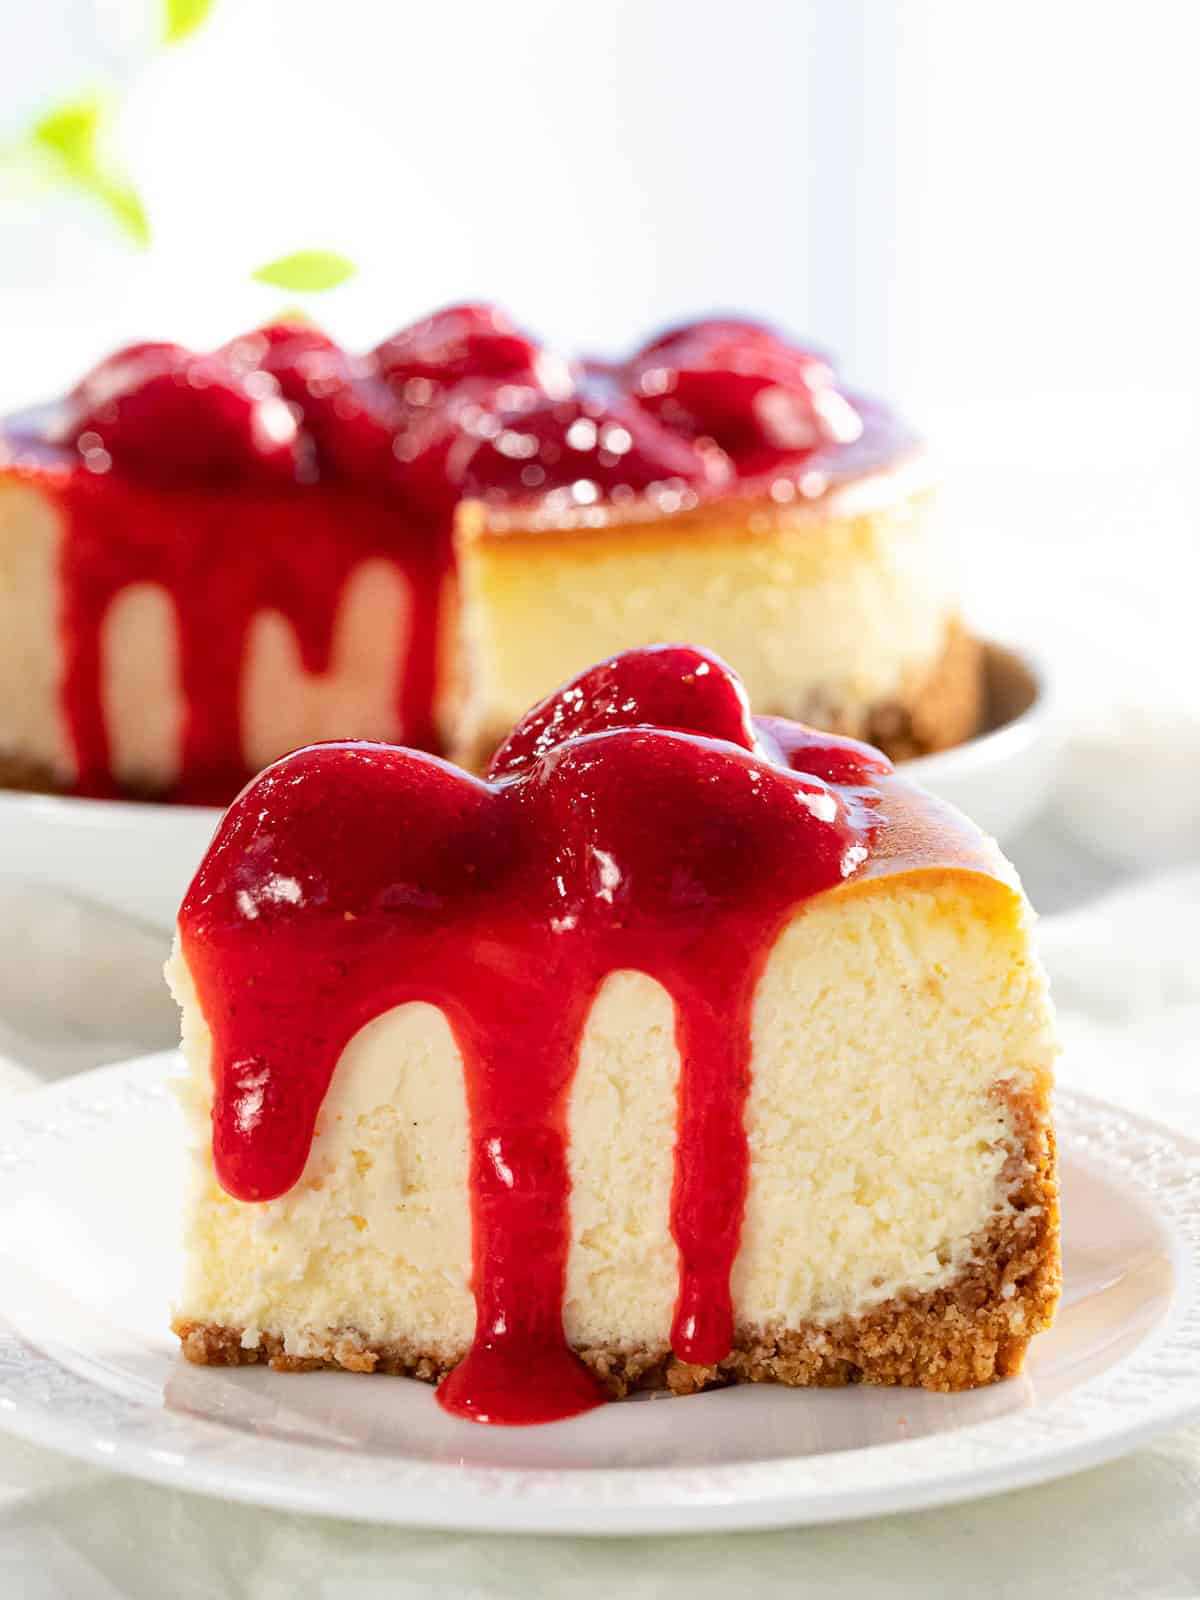 A slice of strawberry cheesecake with strawberry sauce dripping down the sides.